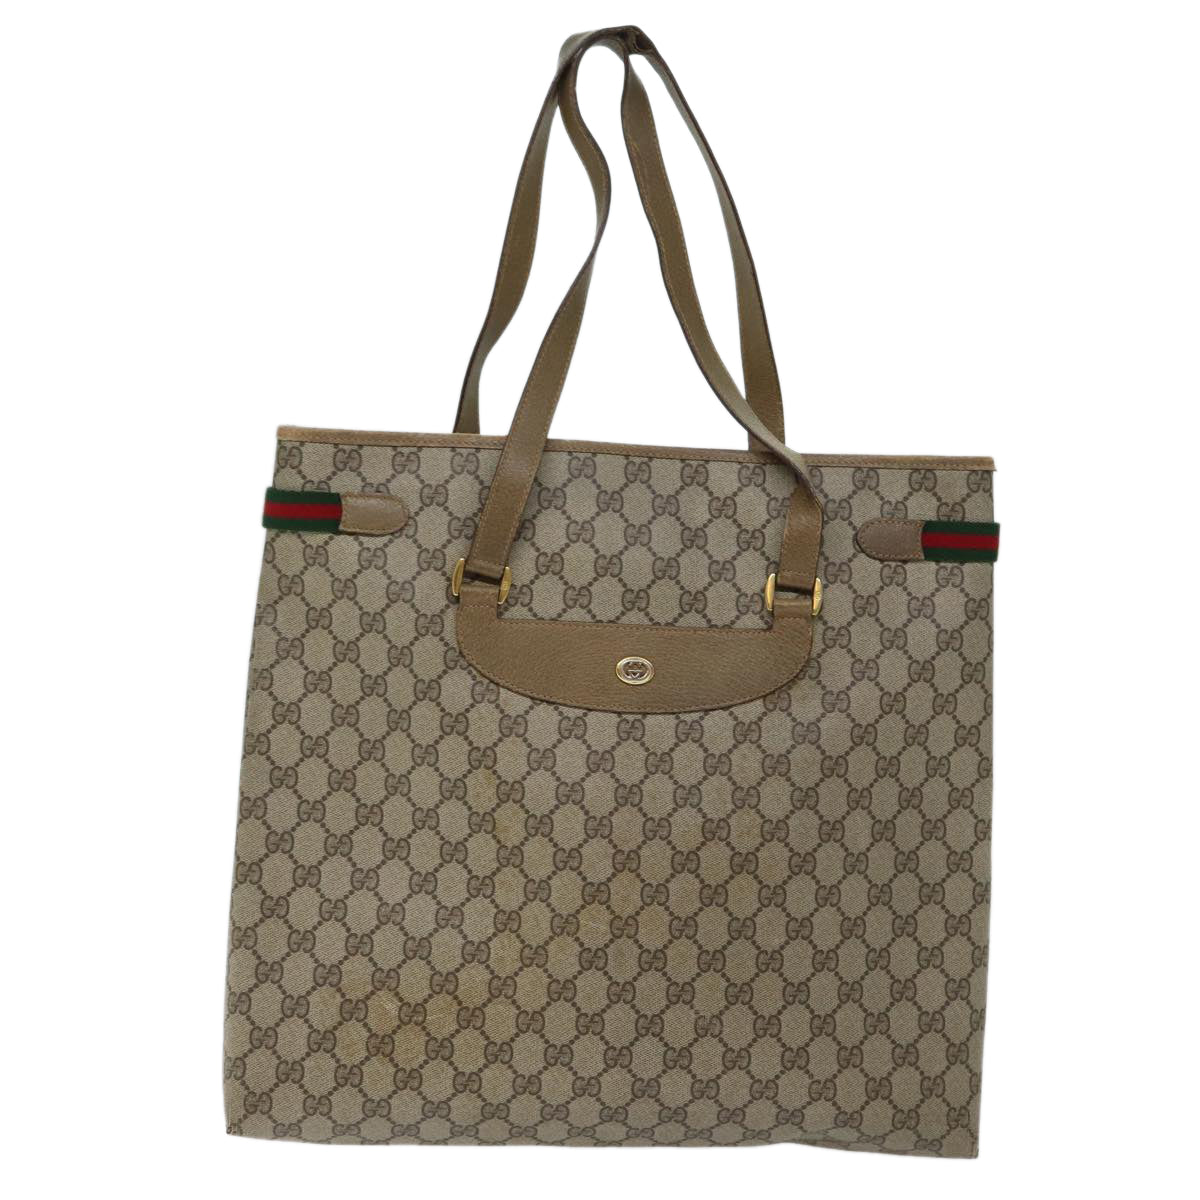 GUCCI GG Supreme Web Sherry Line Tote Bag PVC Beige Red 39 02 091 Auth 69959 - 0